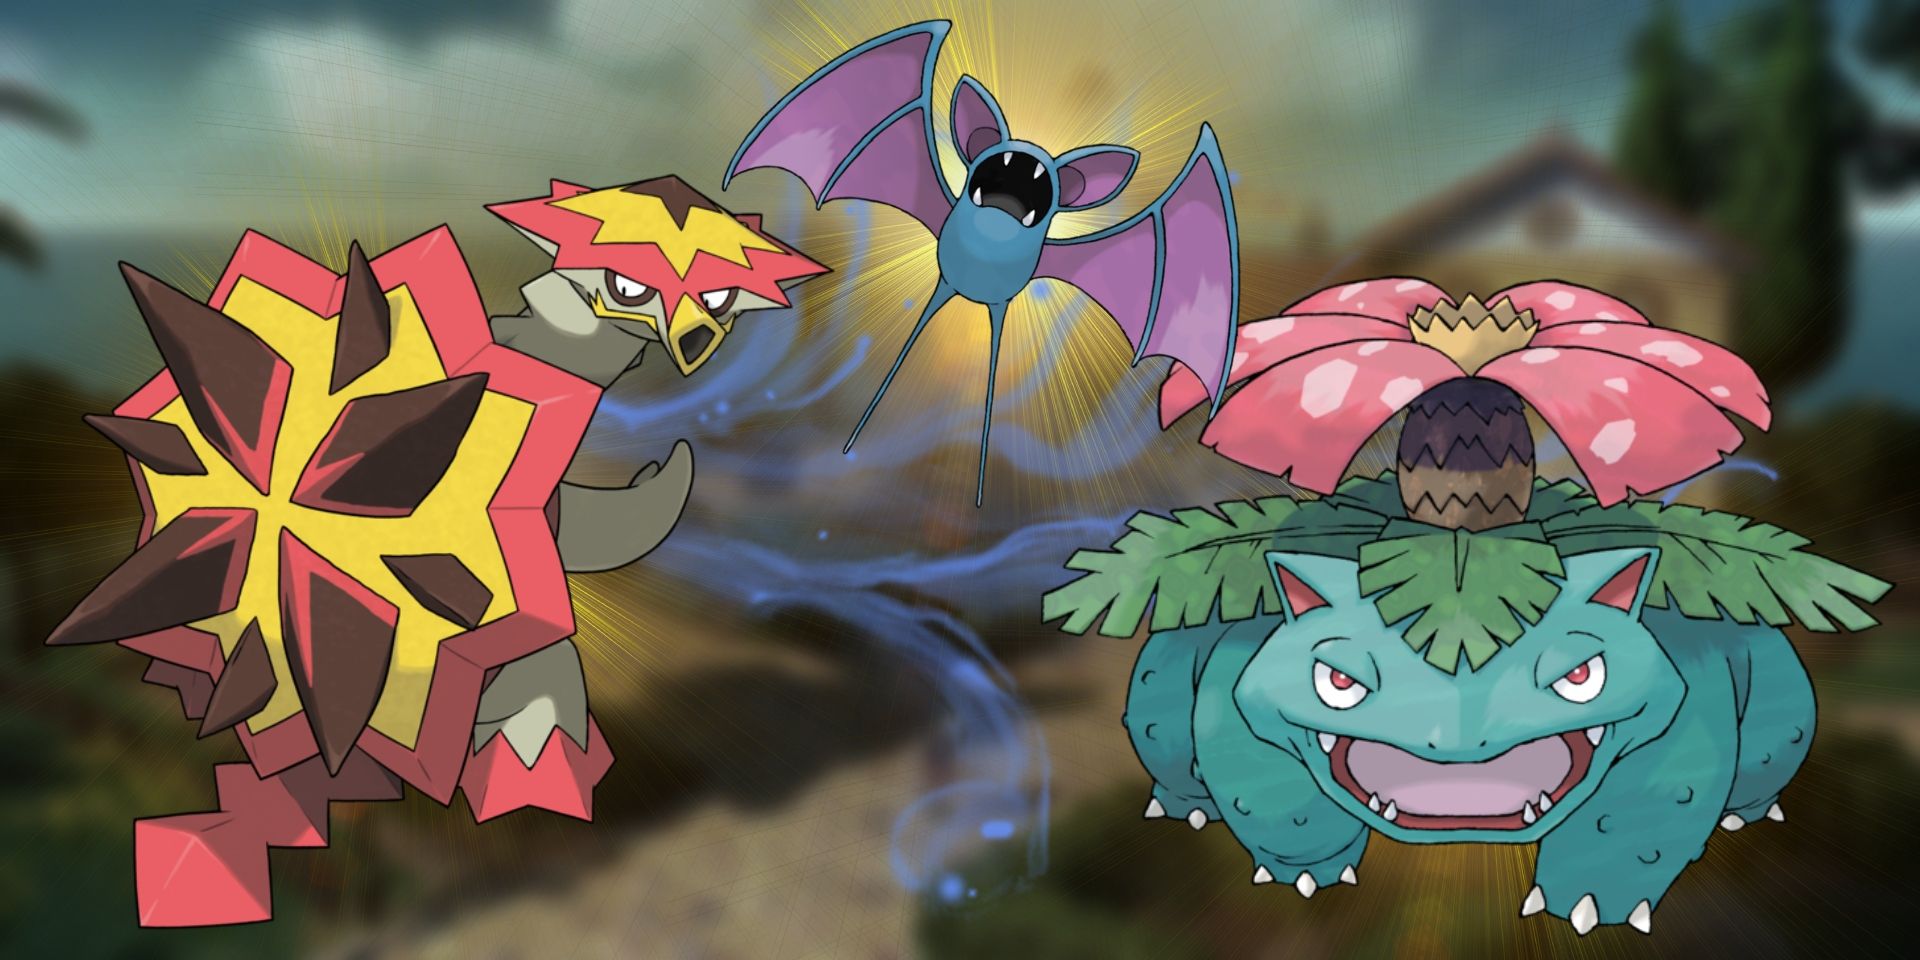 Pokemon's Turtonator to the left, Venusaur to the right, and Zubat flying above in the middle between them. Behind all of them are yellow backlights that highlight them and, in the background, a blue misty effect.